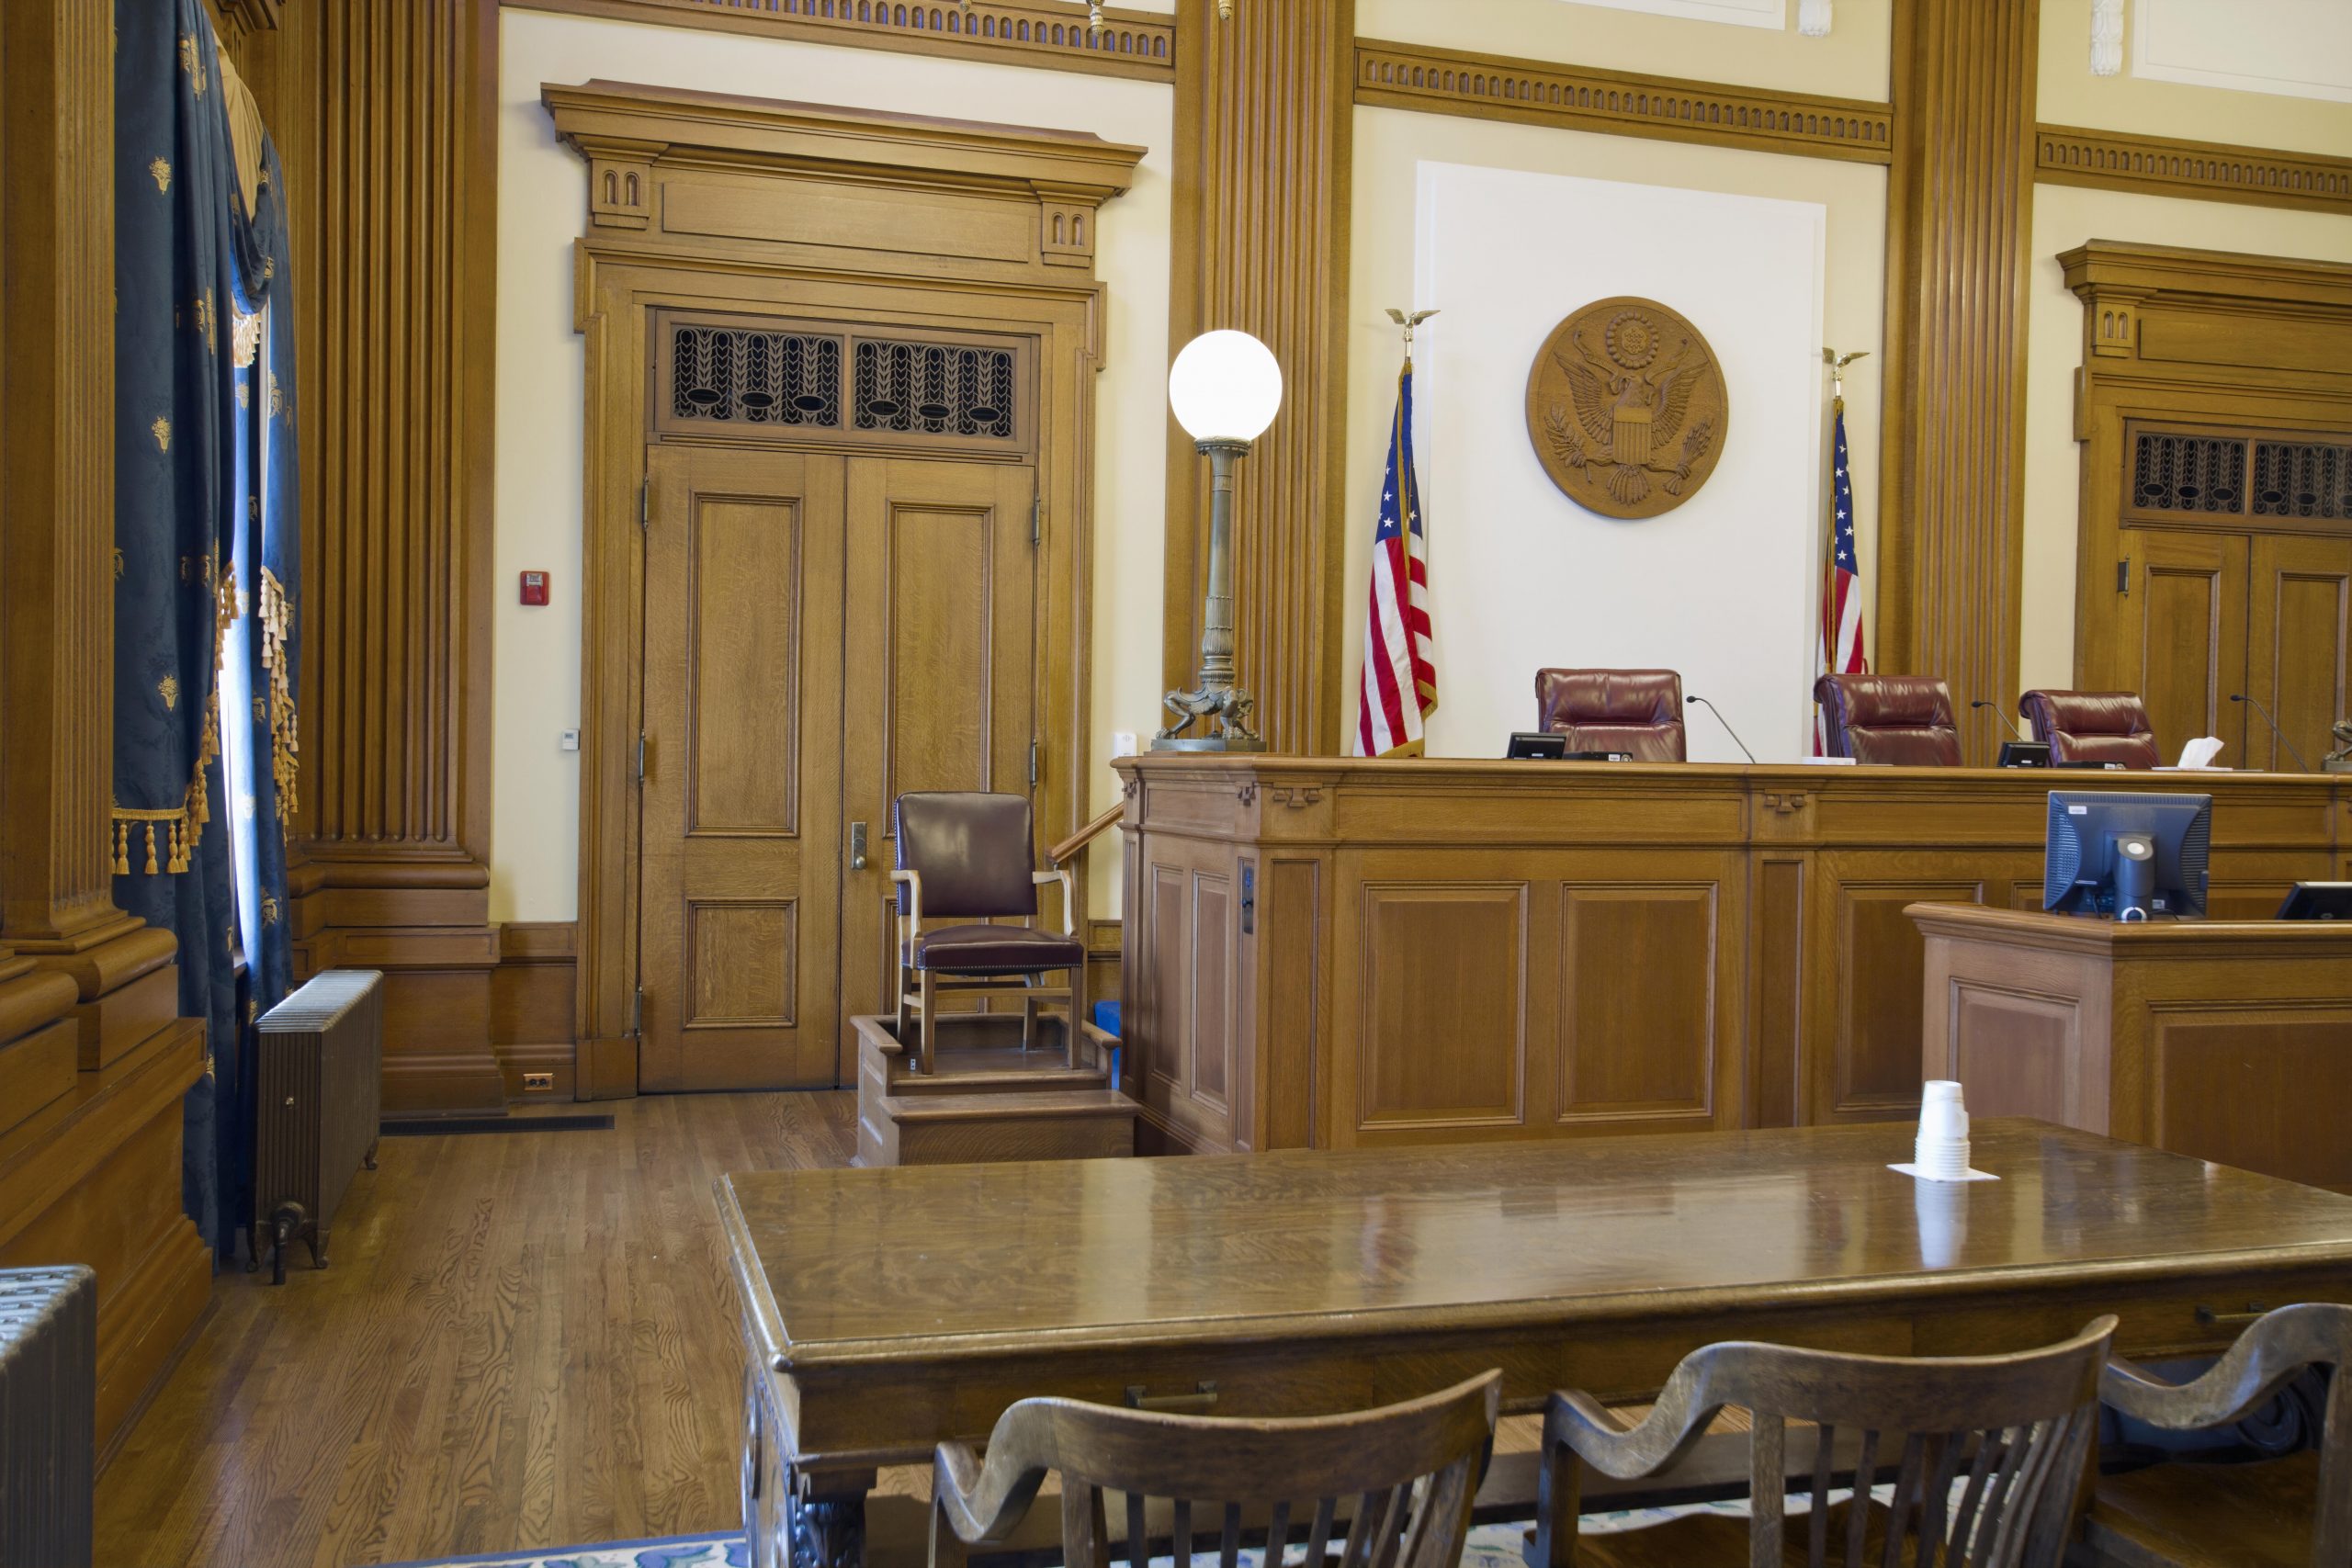 Court Of Appeals Courtroom In Pioneer Courthouse